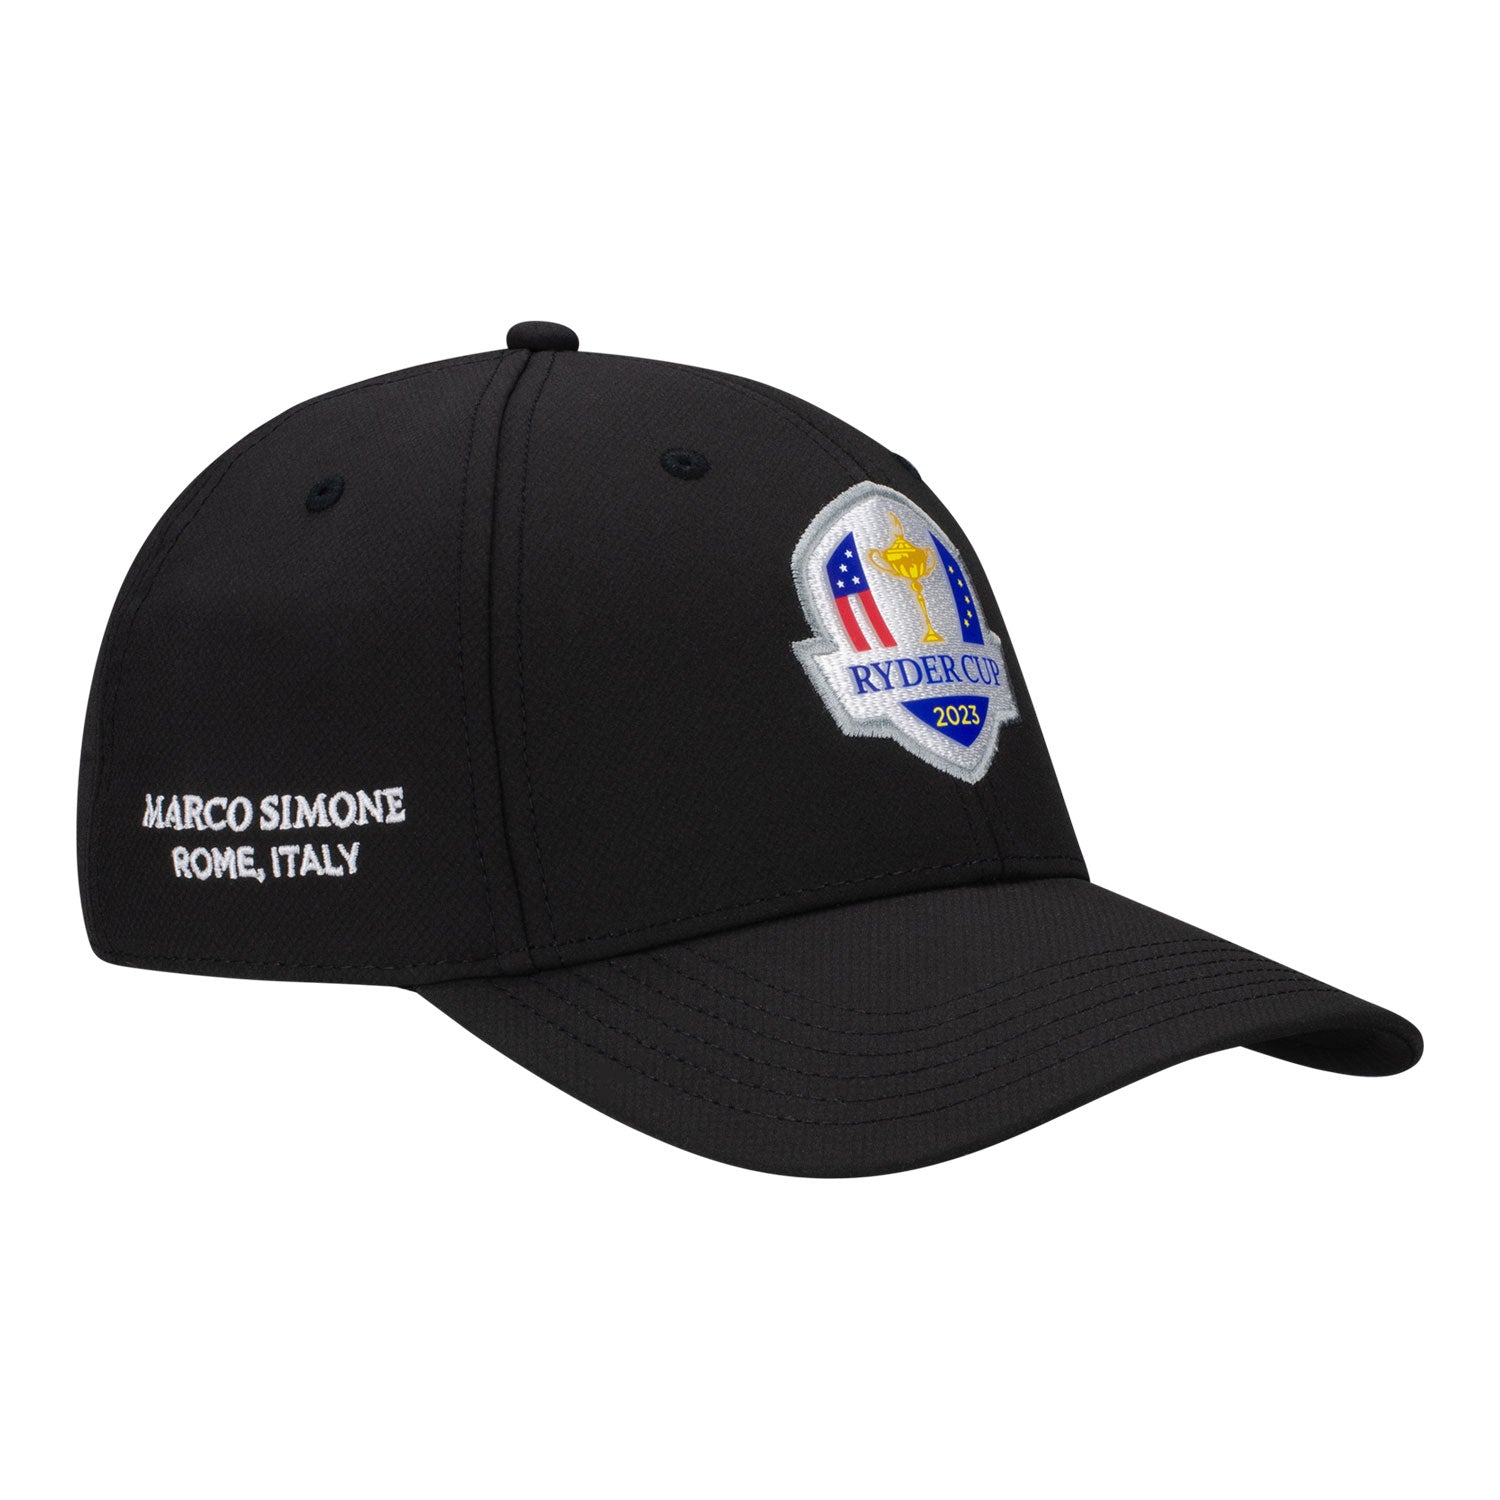 Ahead 2023 Ryder Cup Hat in Black- Front View